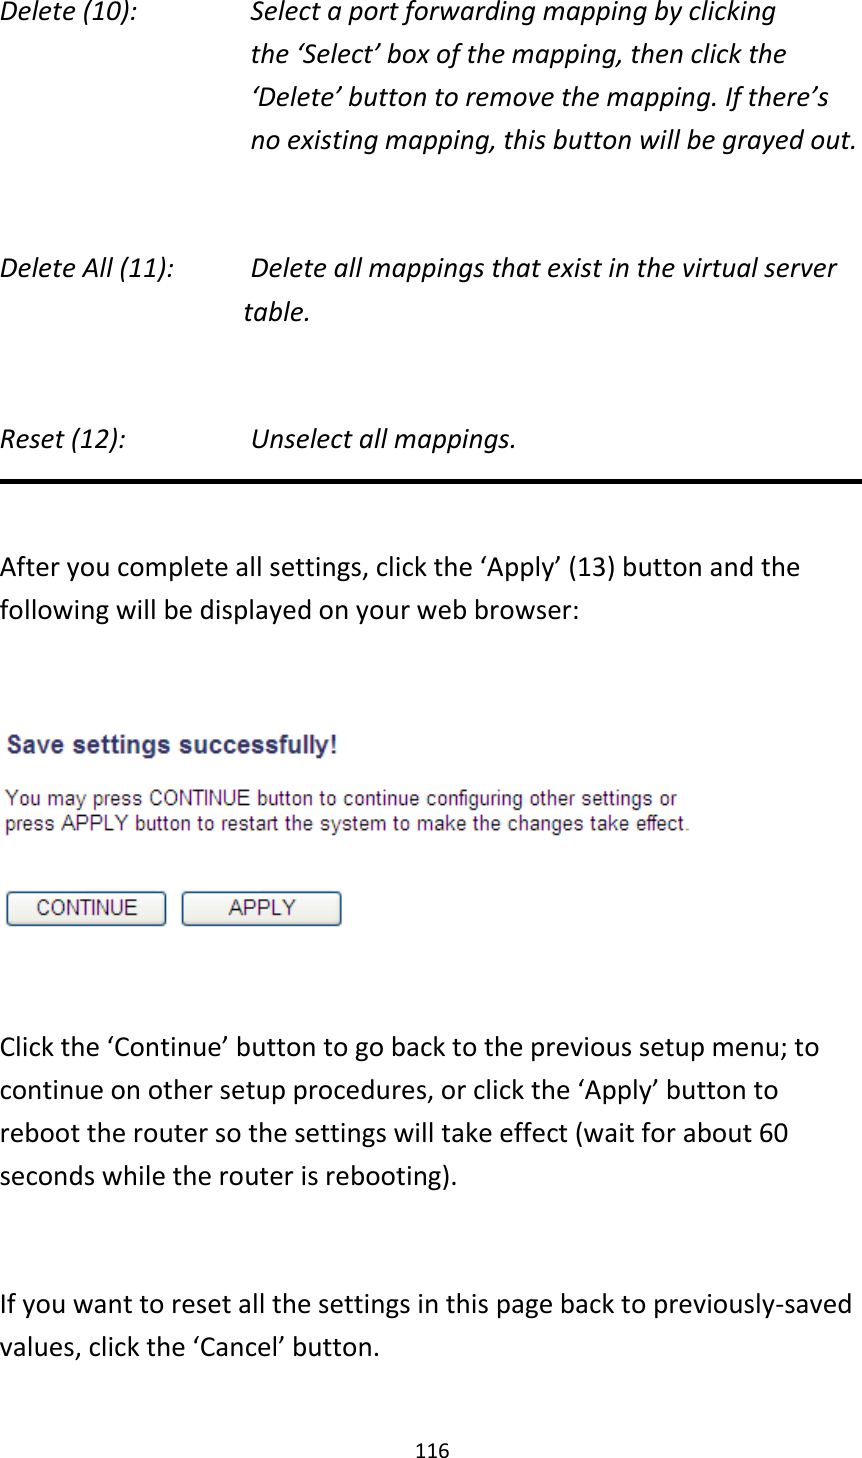 116 Delete (10):      Select a port forwarding mapping by clicking     the ‘Select’ box of the mapping, then click the ‘Delete’ button to remove the mapping. If there’s no existing mapping, this button will be grayed out.  Delete All (11):     Delete all mappings that exist in the virtual server table.  Reset (12):       Unselect all mappings.  After you complete all settings, click the ‘Apply’ (13) button and the following will be displayed on your web browser:    Click the ‘Continue’ button to go back to the previous setup menu; to continue on other setup procedures, or click the ‘Apply’ button to reboot the router so the settings will take effect (wait for about 60 seconds while the router is rebooting).  If you want to reset all the settings in this page back to previously-saved values, click the ‘Cancel’ button.  